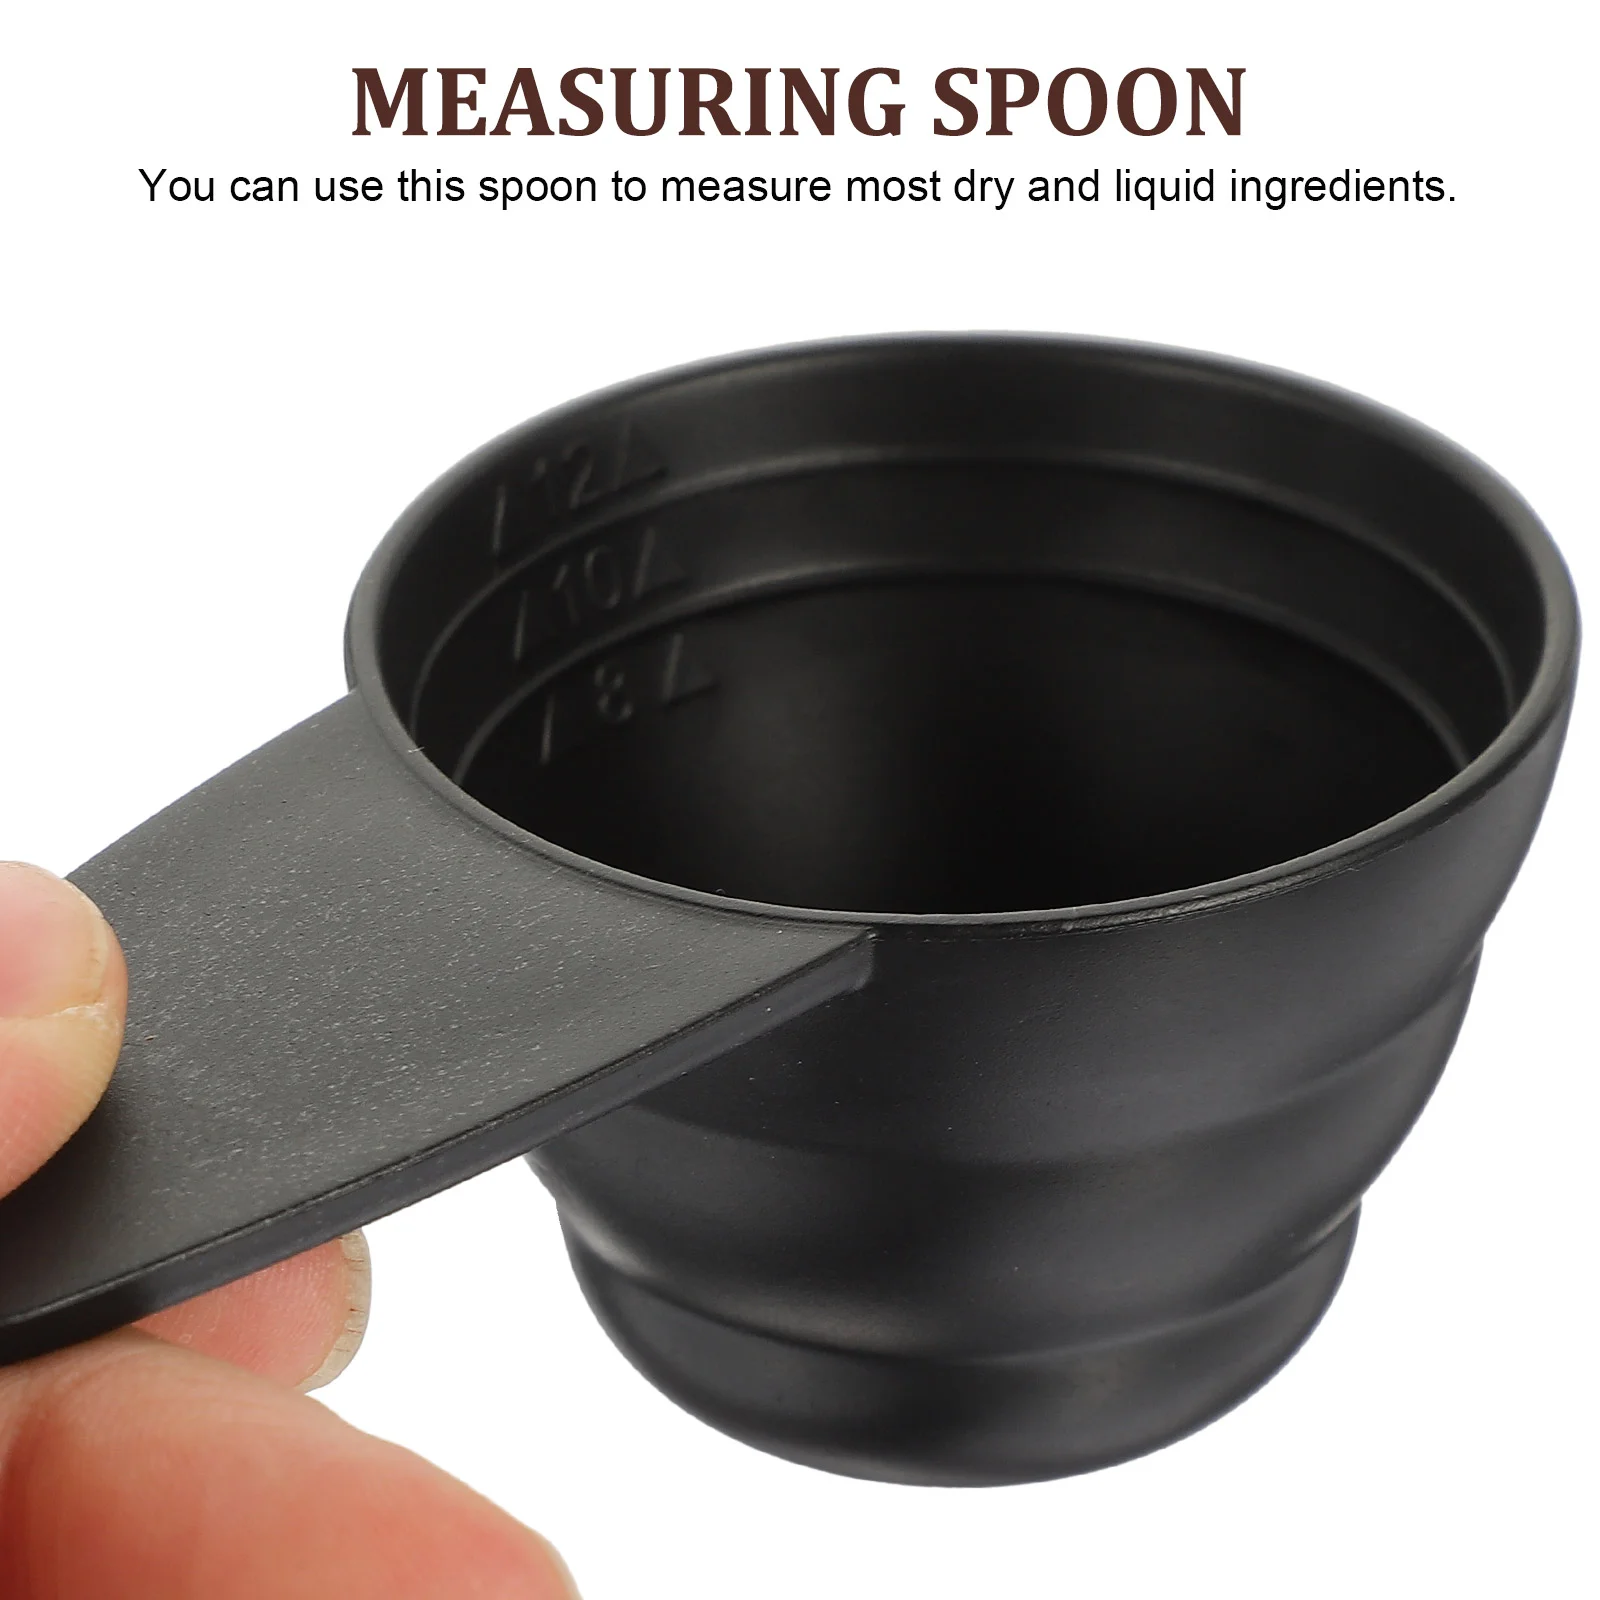 https://ae01.alicdn.com/kf/Se4029b7d2f16430e8b5488e73fec4972D/Small-Scoops-Canisters-Measure-Spoon-Tablespoon-Measuring-Cup-Long-Handled-Spoons.jpg